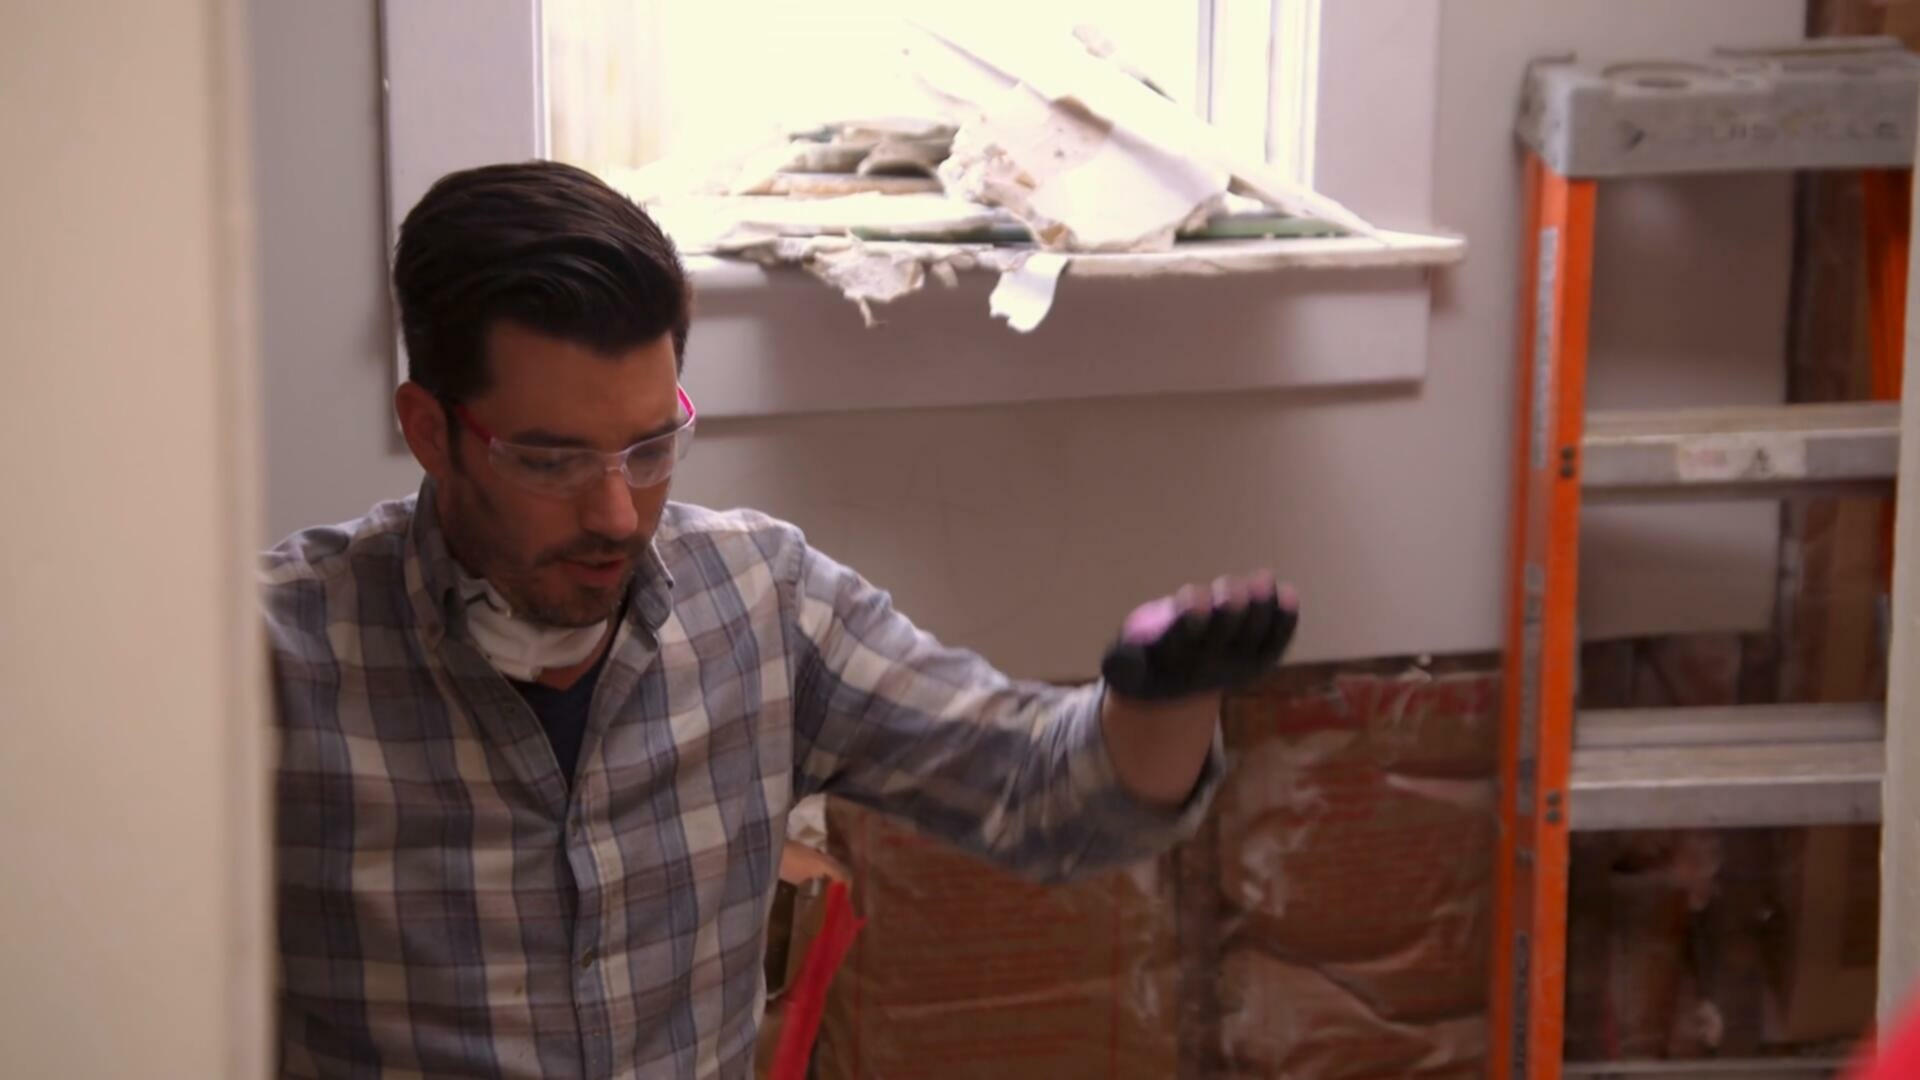 Property Brothers S11E03 Big City Move Kristen and Kacy 1080p MAX WEB DL DDP2 0 H 264 NTb TGx